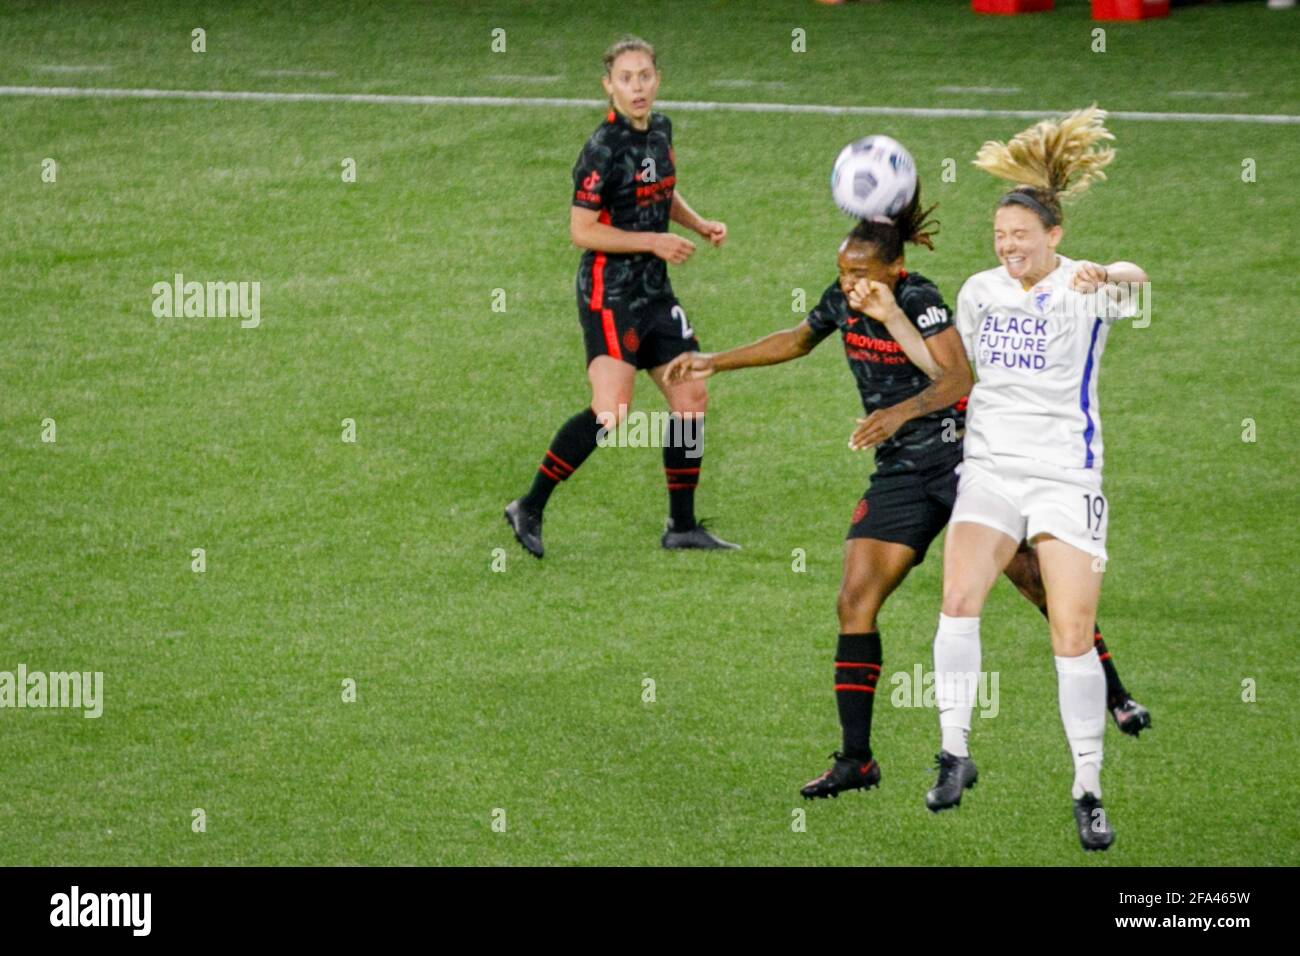 Portland, USA. 21st Apr, 2021. The Portland Thorns FC beat Tacoma's OL Reign 2-0 at Providence Park in Portland, Oregon on April 21, 2021, which sends the Thorns to the Challenge Cup finals at home on May 8. (Photo by John Rudoff/Sipa USA) Credit: Sipa USA/Alamy Live News Stock Photo